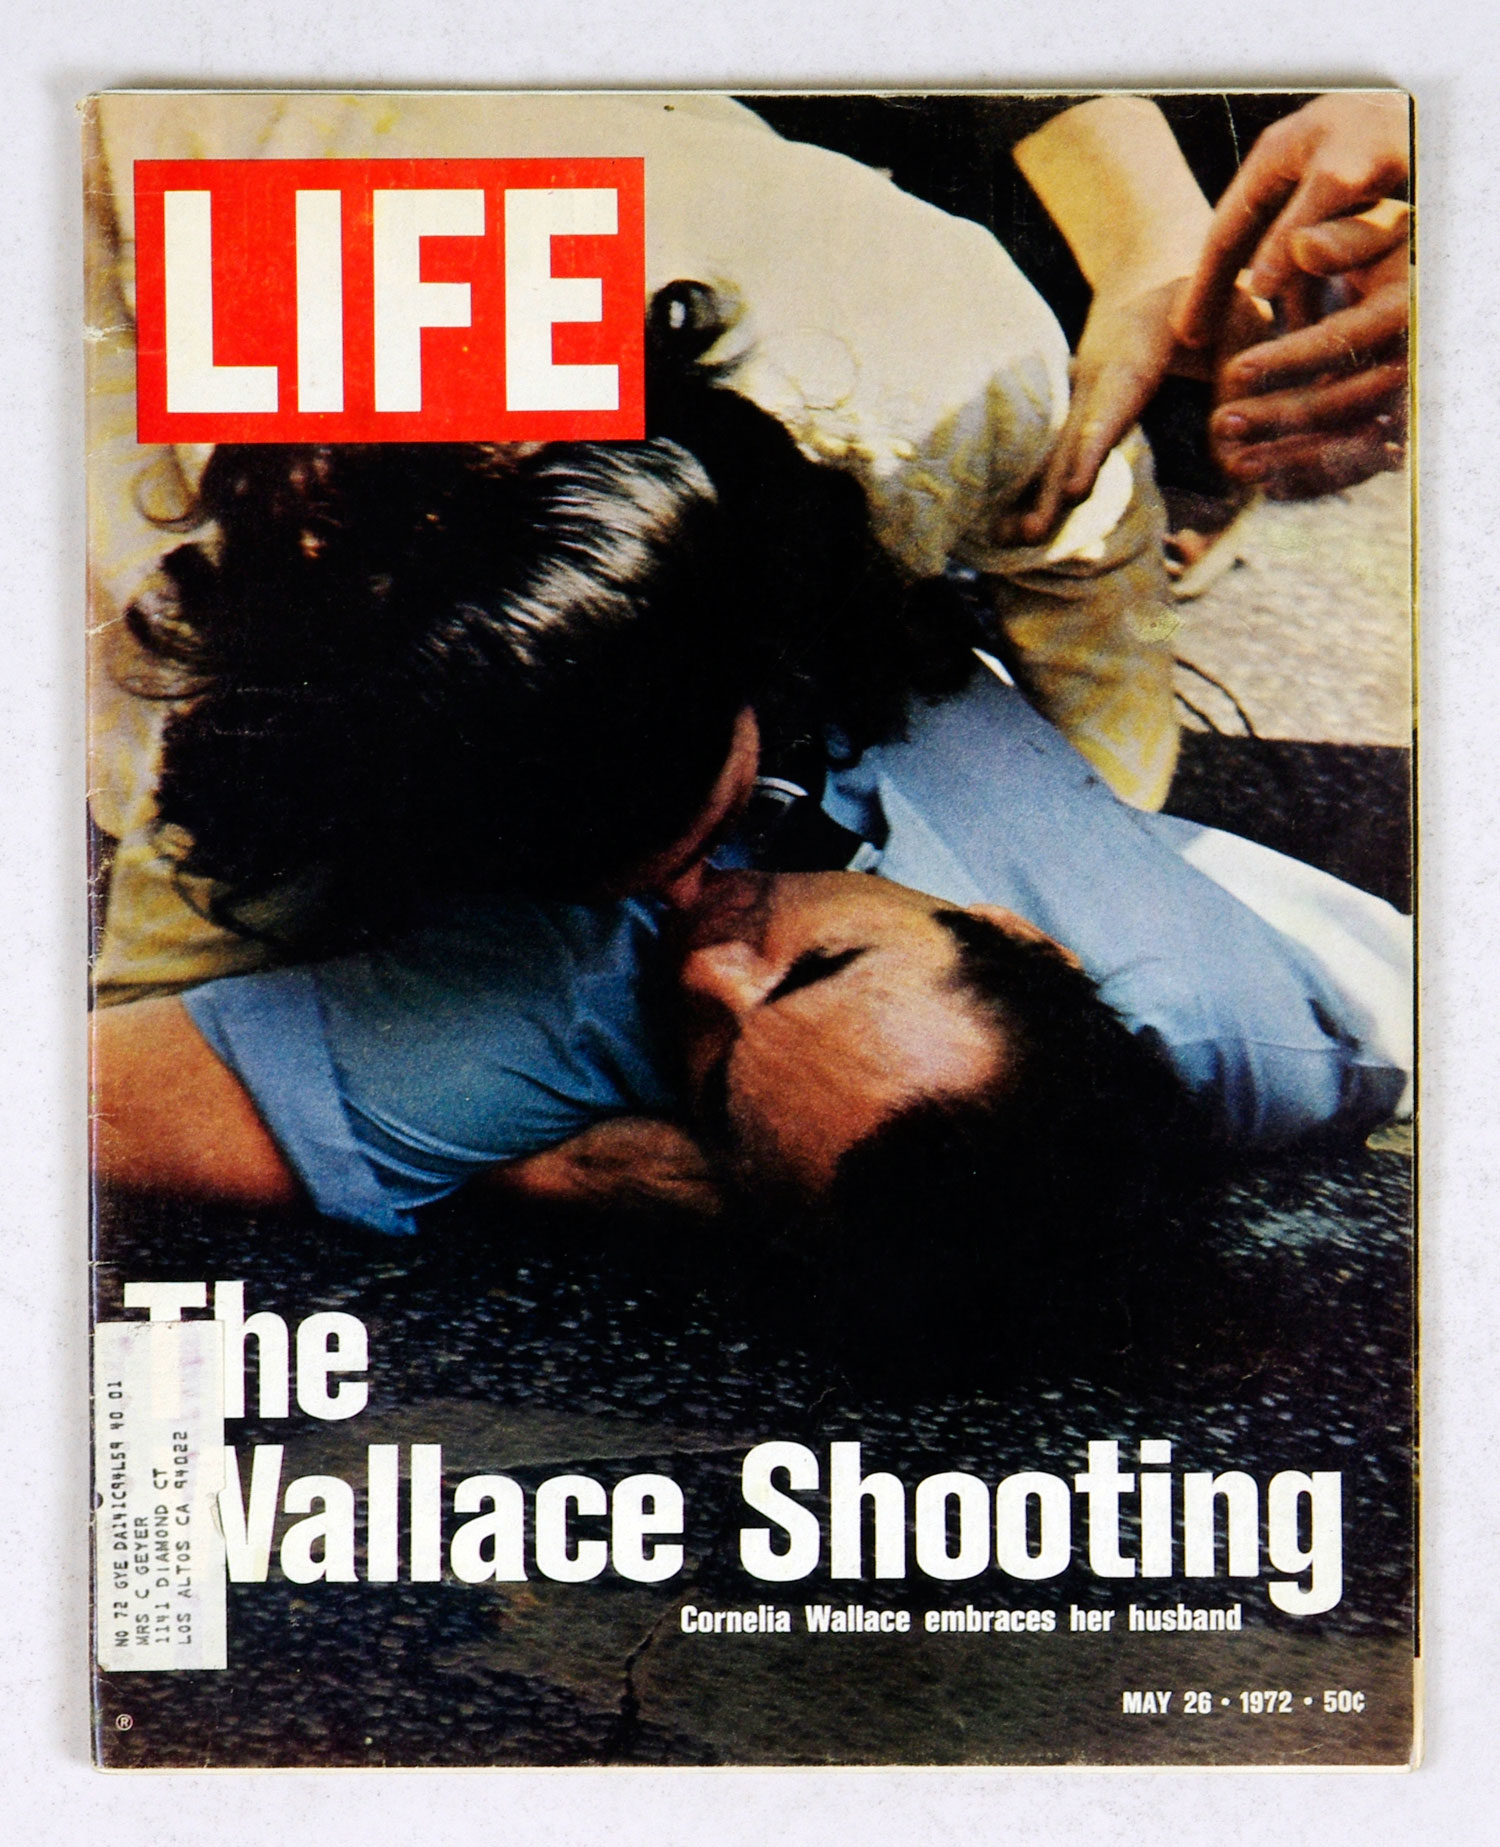 LIFE Magazine Back Issue 1972 May 26 The Wallace Shooting